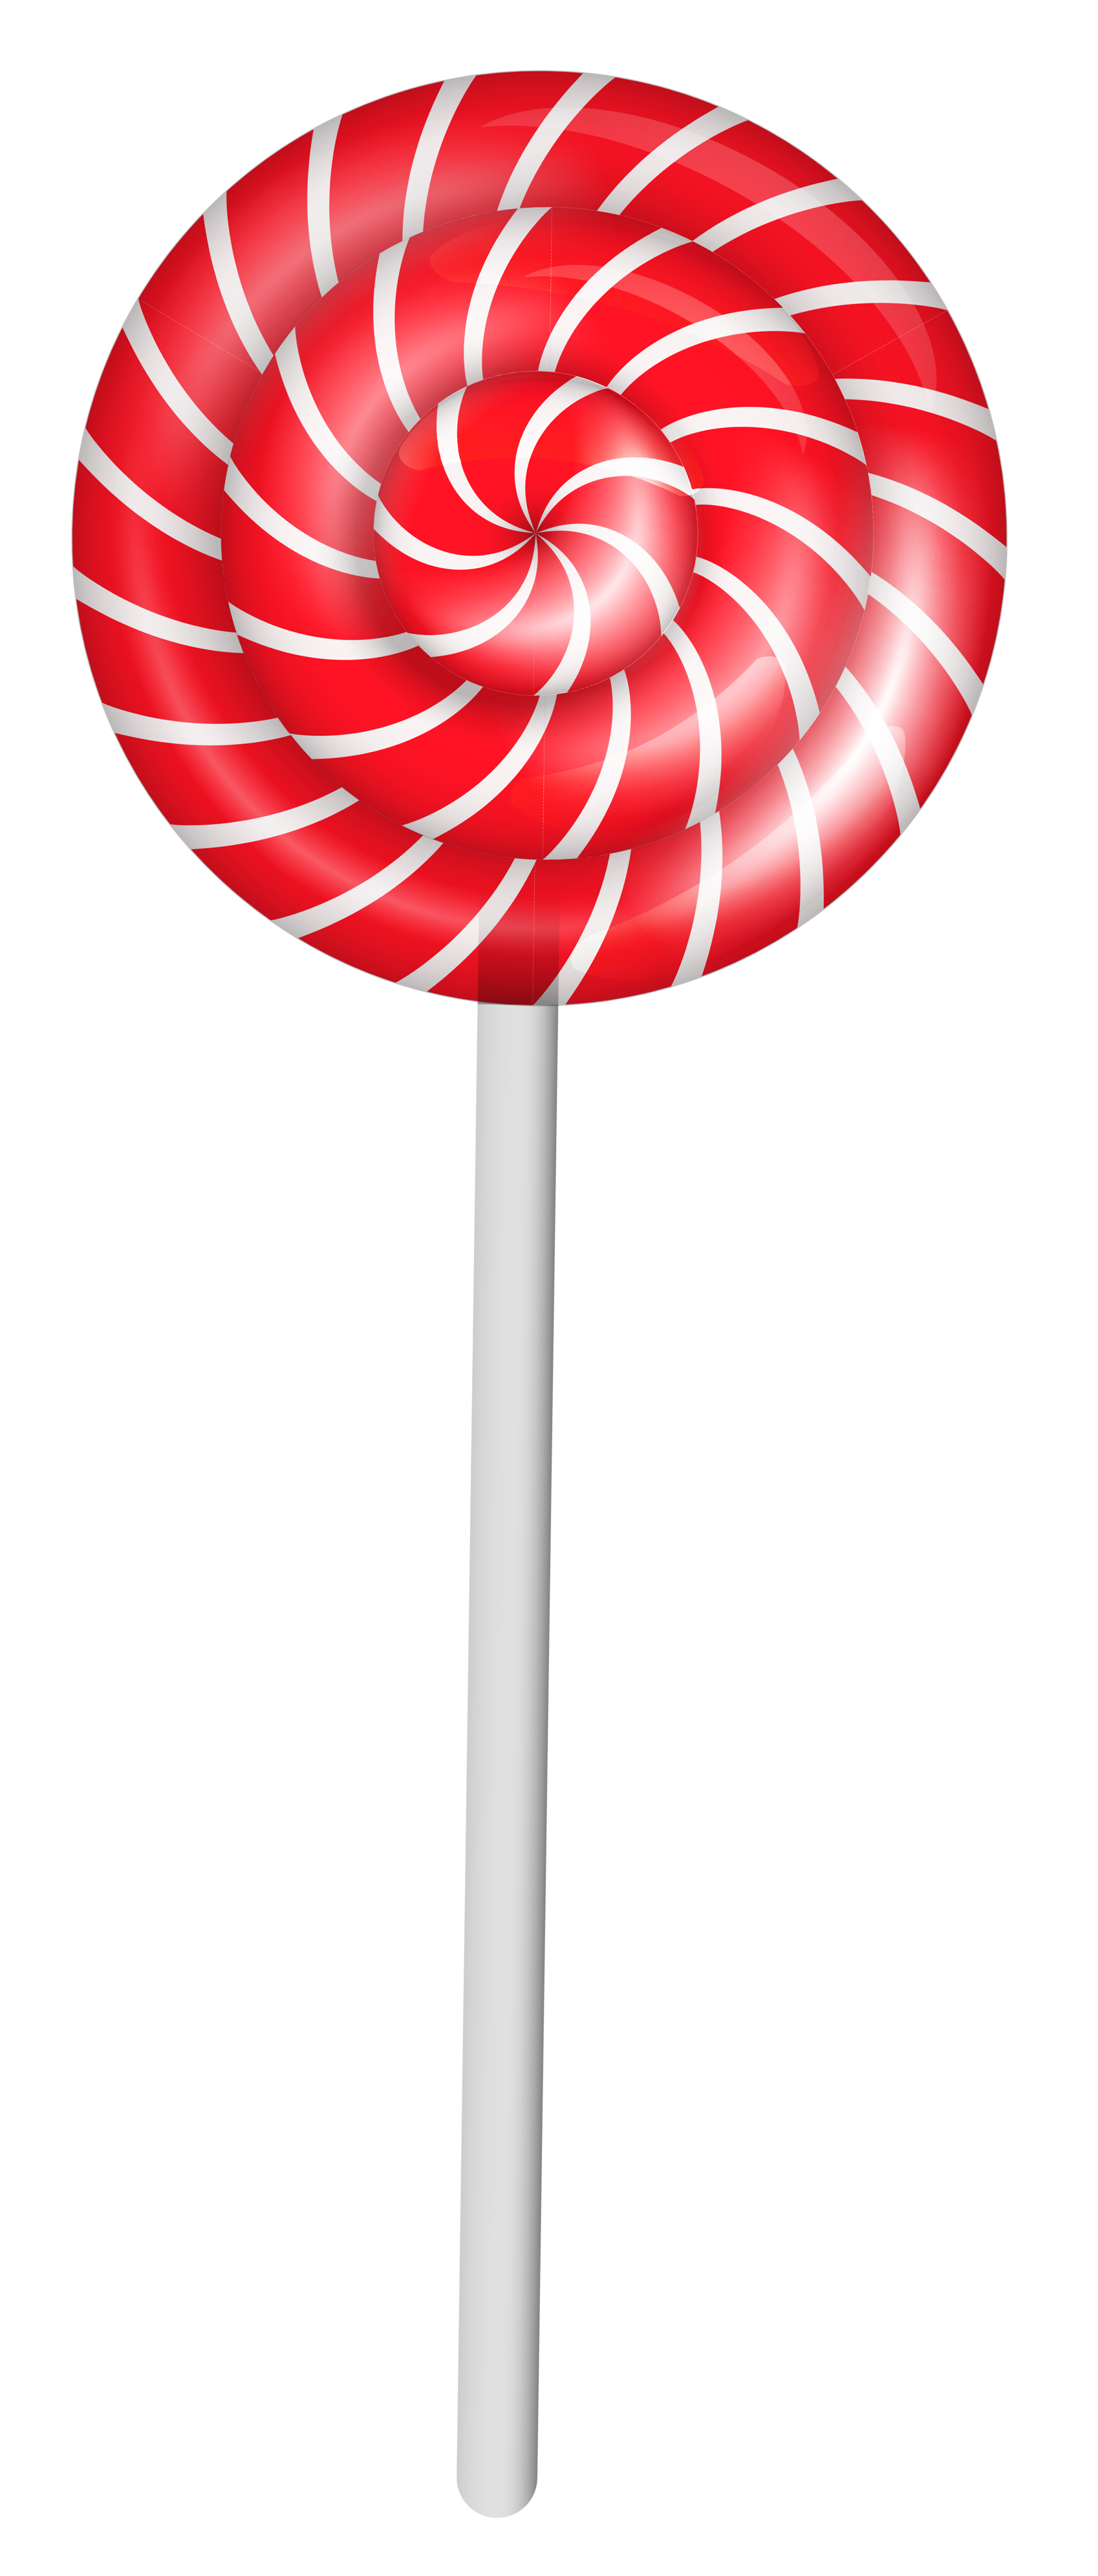 Pic Lollipop Colorful HQ Image Free PNG Image